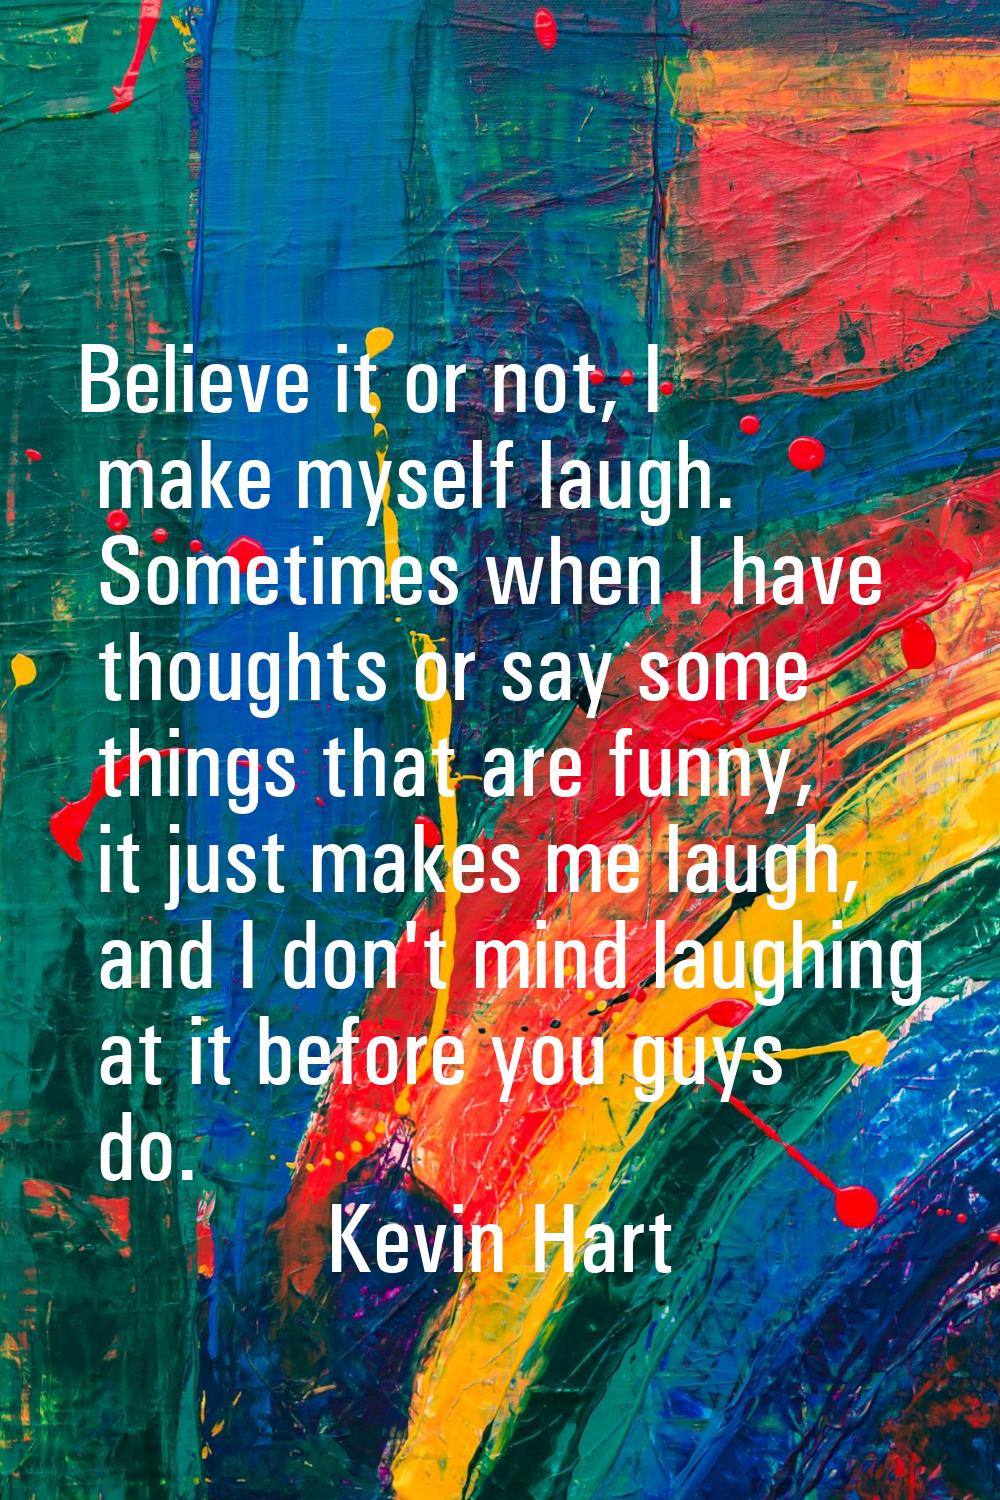 Believe it or not, I make myself laugh. Sometimes when I have thoughts or say some things that are 